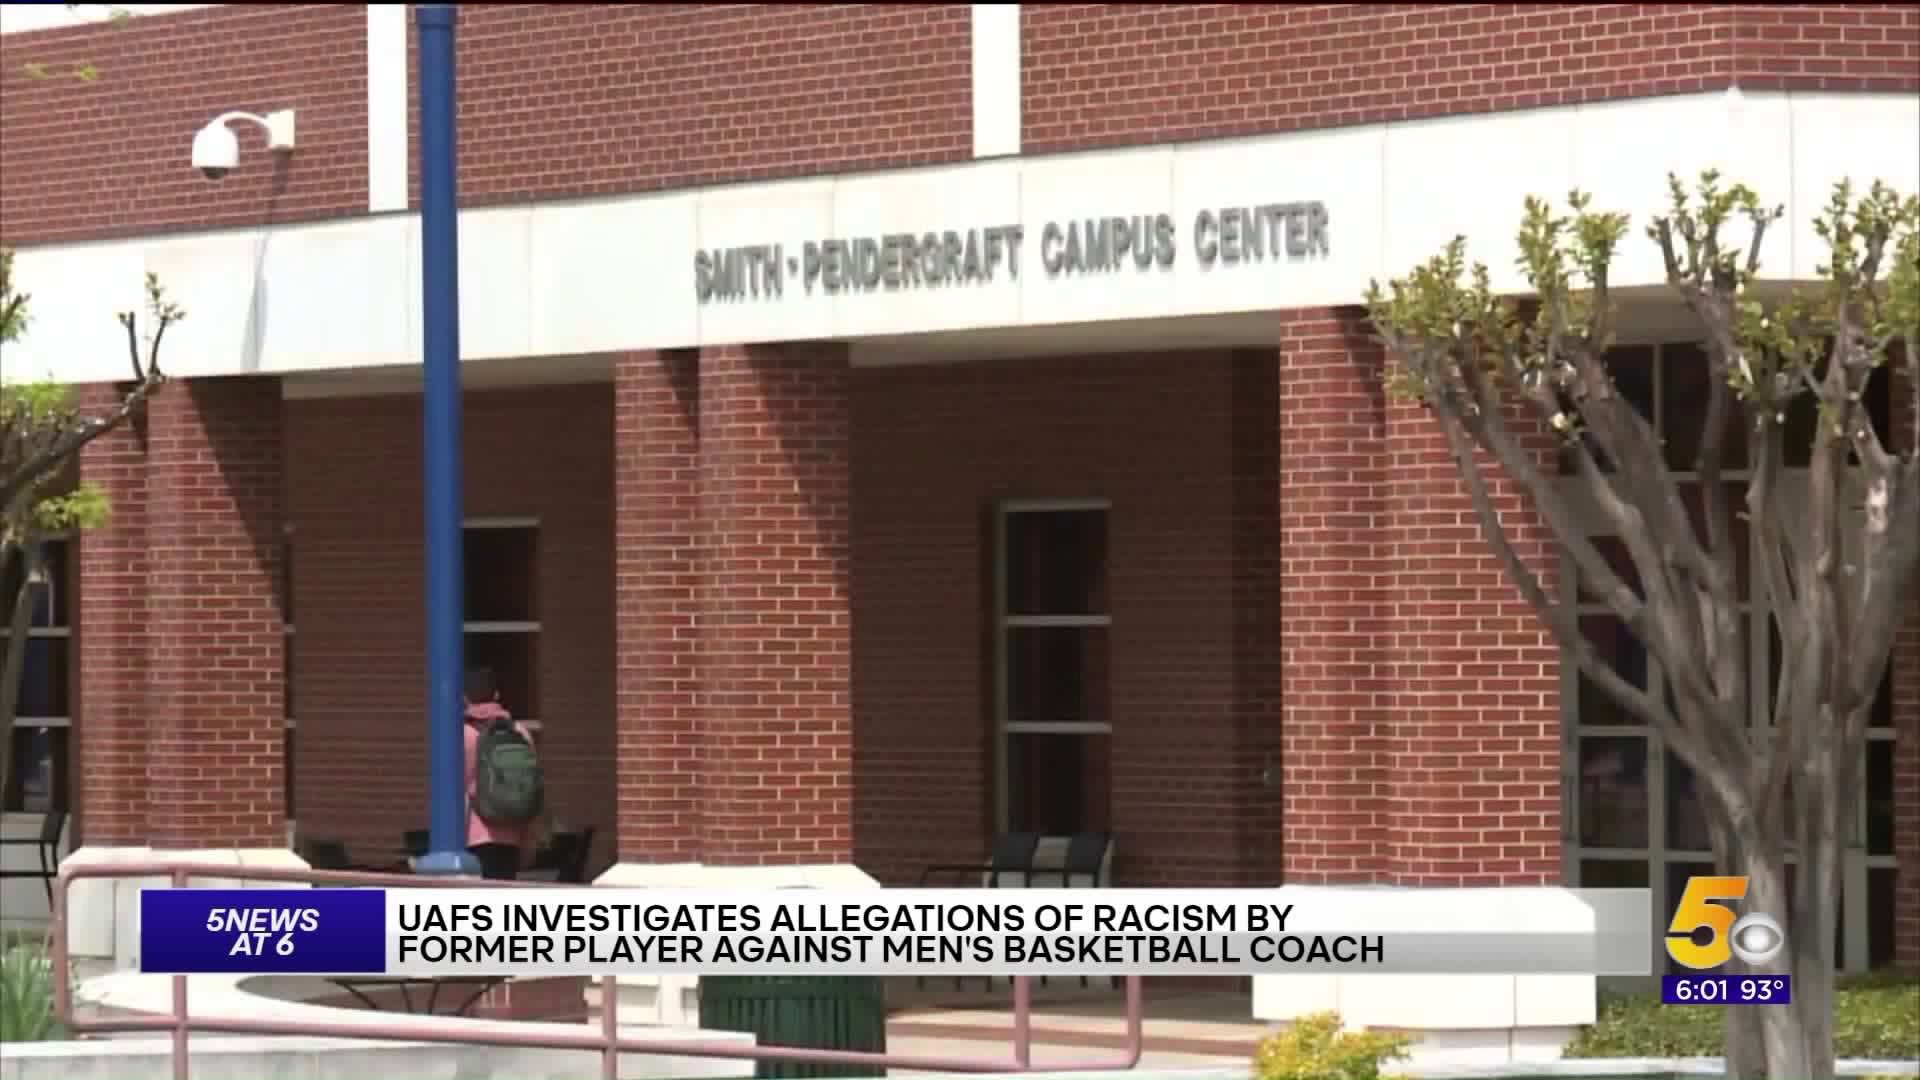 UAFS Investigating Allegations Of Racism By Former Basketball Player Against Coach